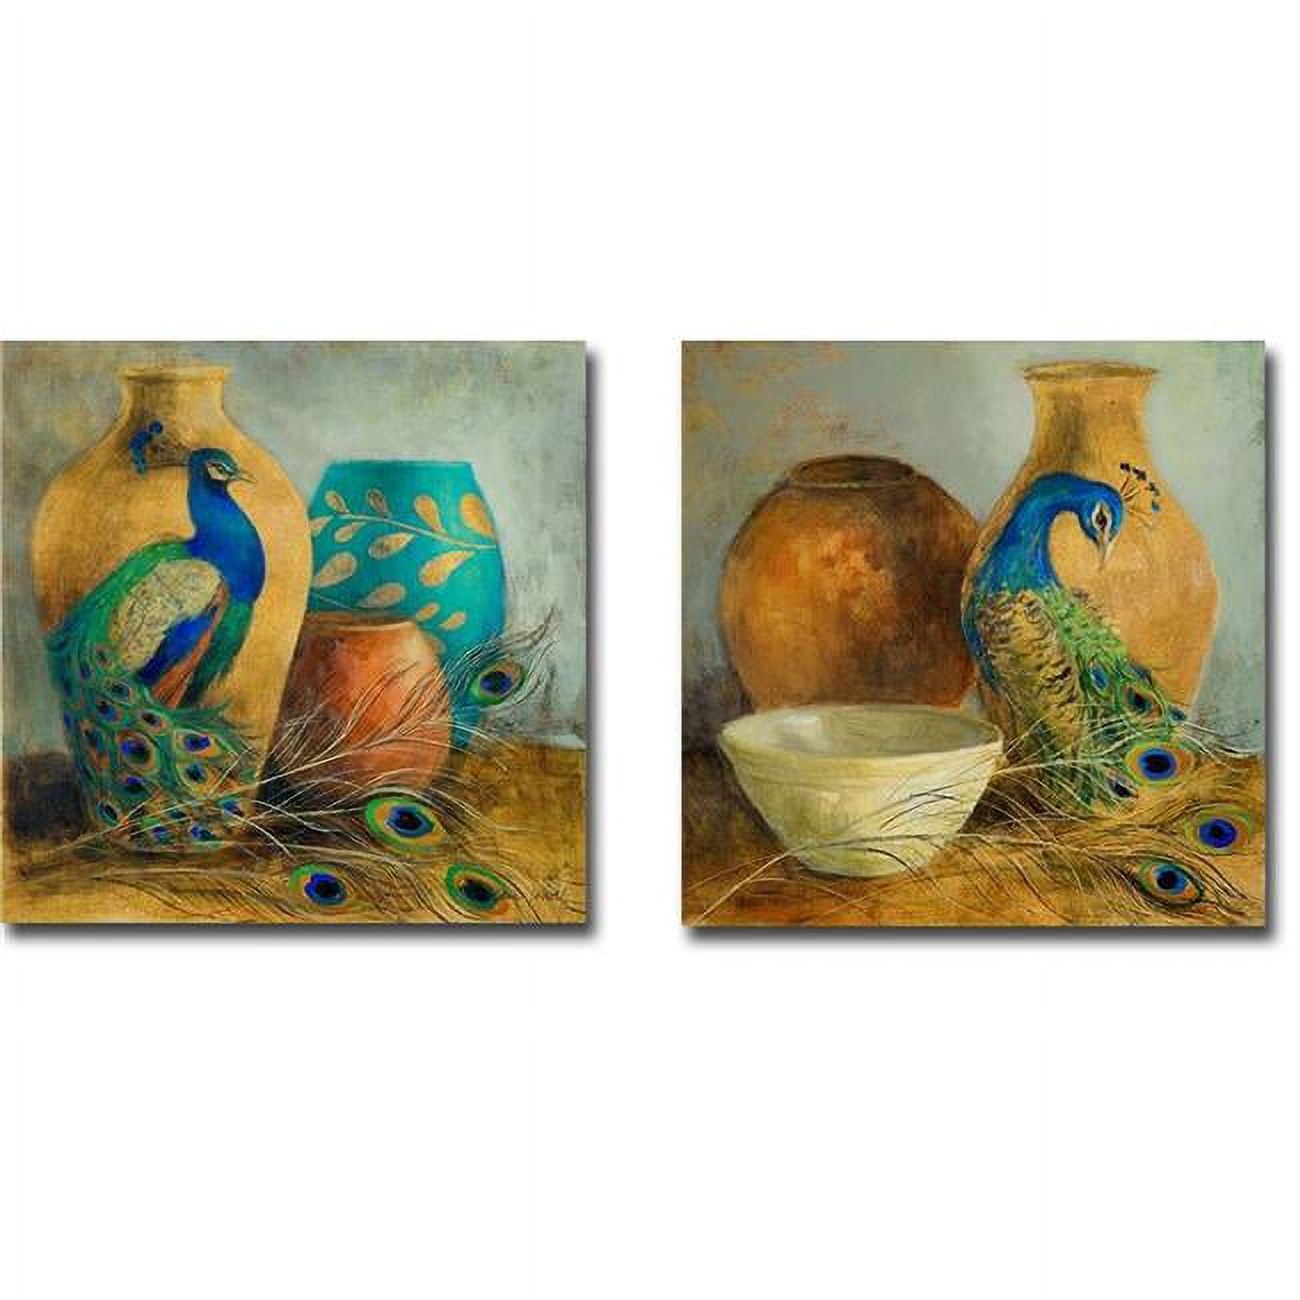 3636498sg Peacock Vessels I & Ii By Lanie Loreth 2-piece Premium Oversize Gallery-wrapped Canvas Giclee Art Set - 36 X 36 In.